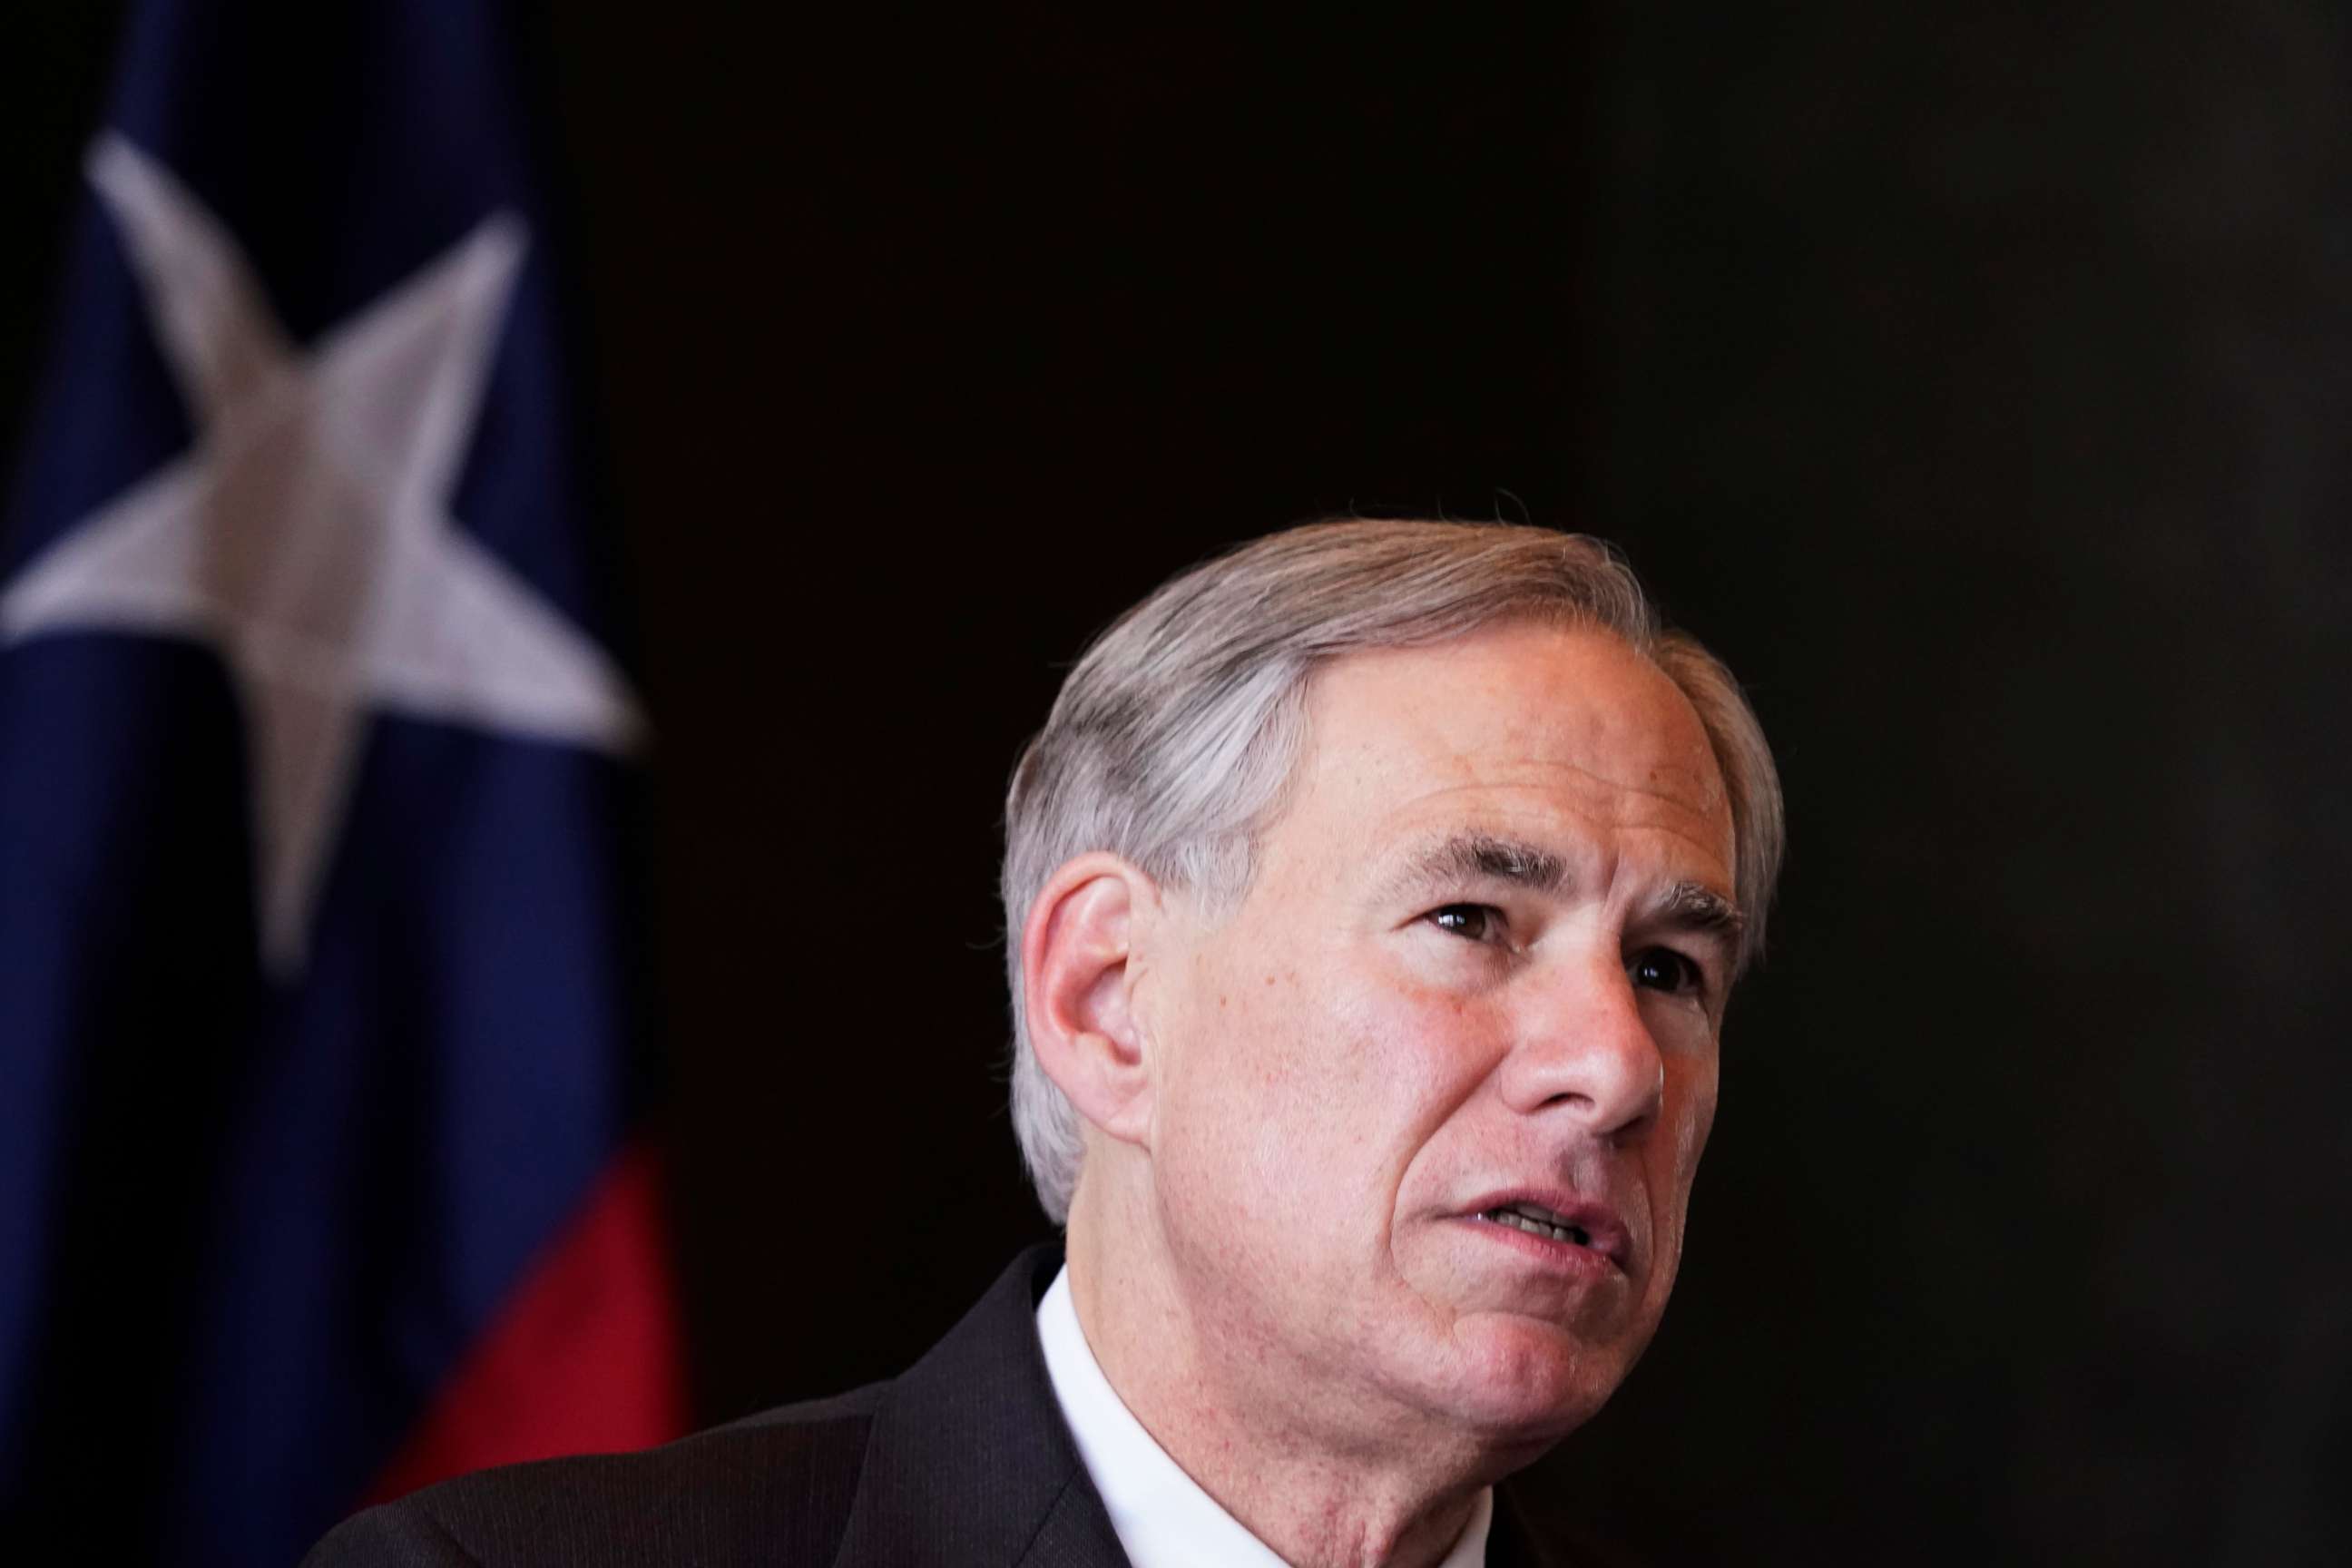 PHOTO: Texas Gov. Greg Abbott speaks about migrant children detentions during a press conference in Dallas on March 17, 2021.